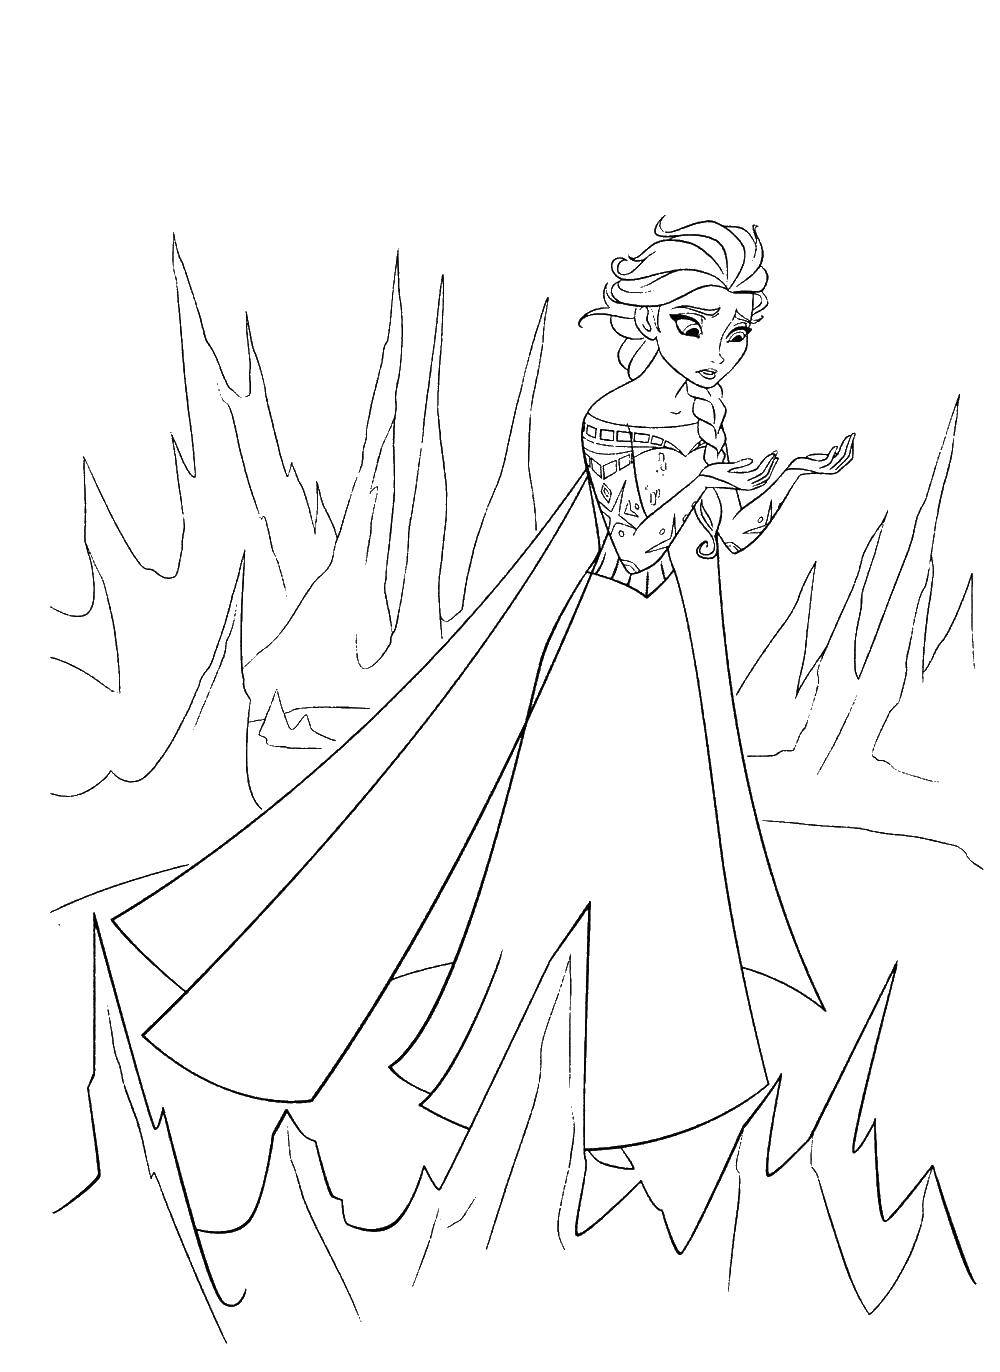 Coloring Elsa in the ice castle. Category coloring cold heart. Tags:  Kristoff, Elsa, Anna.